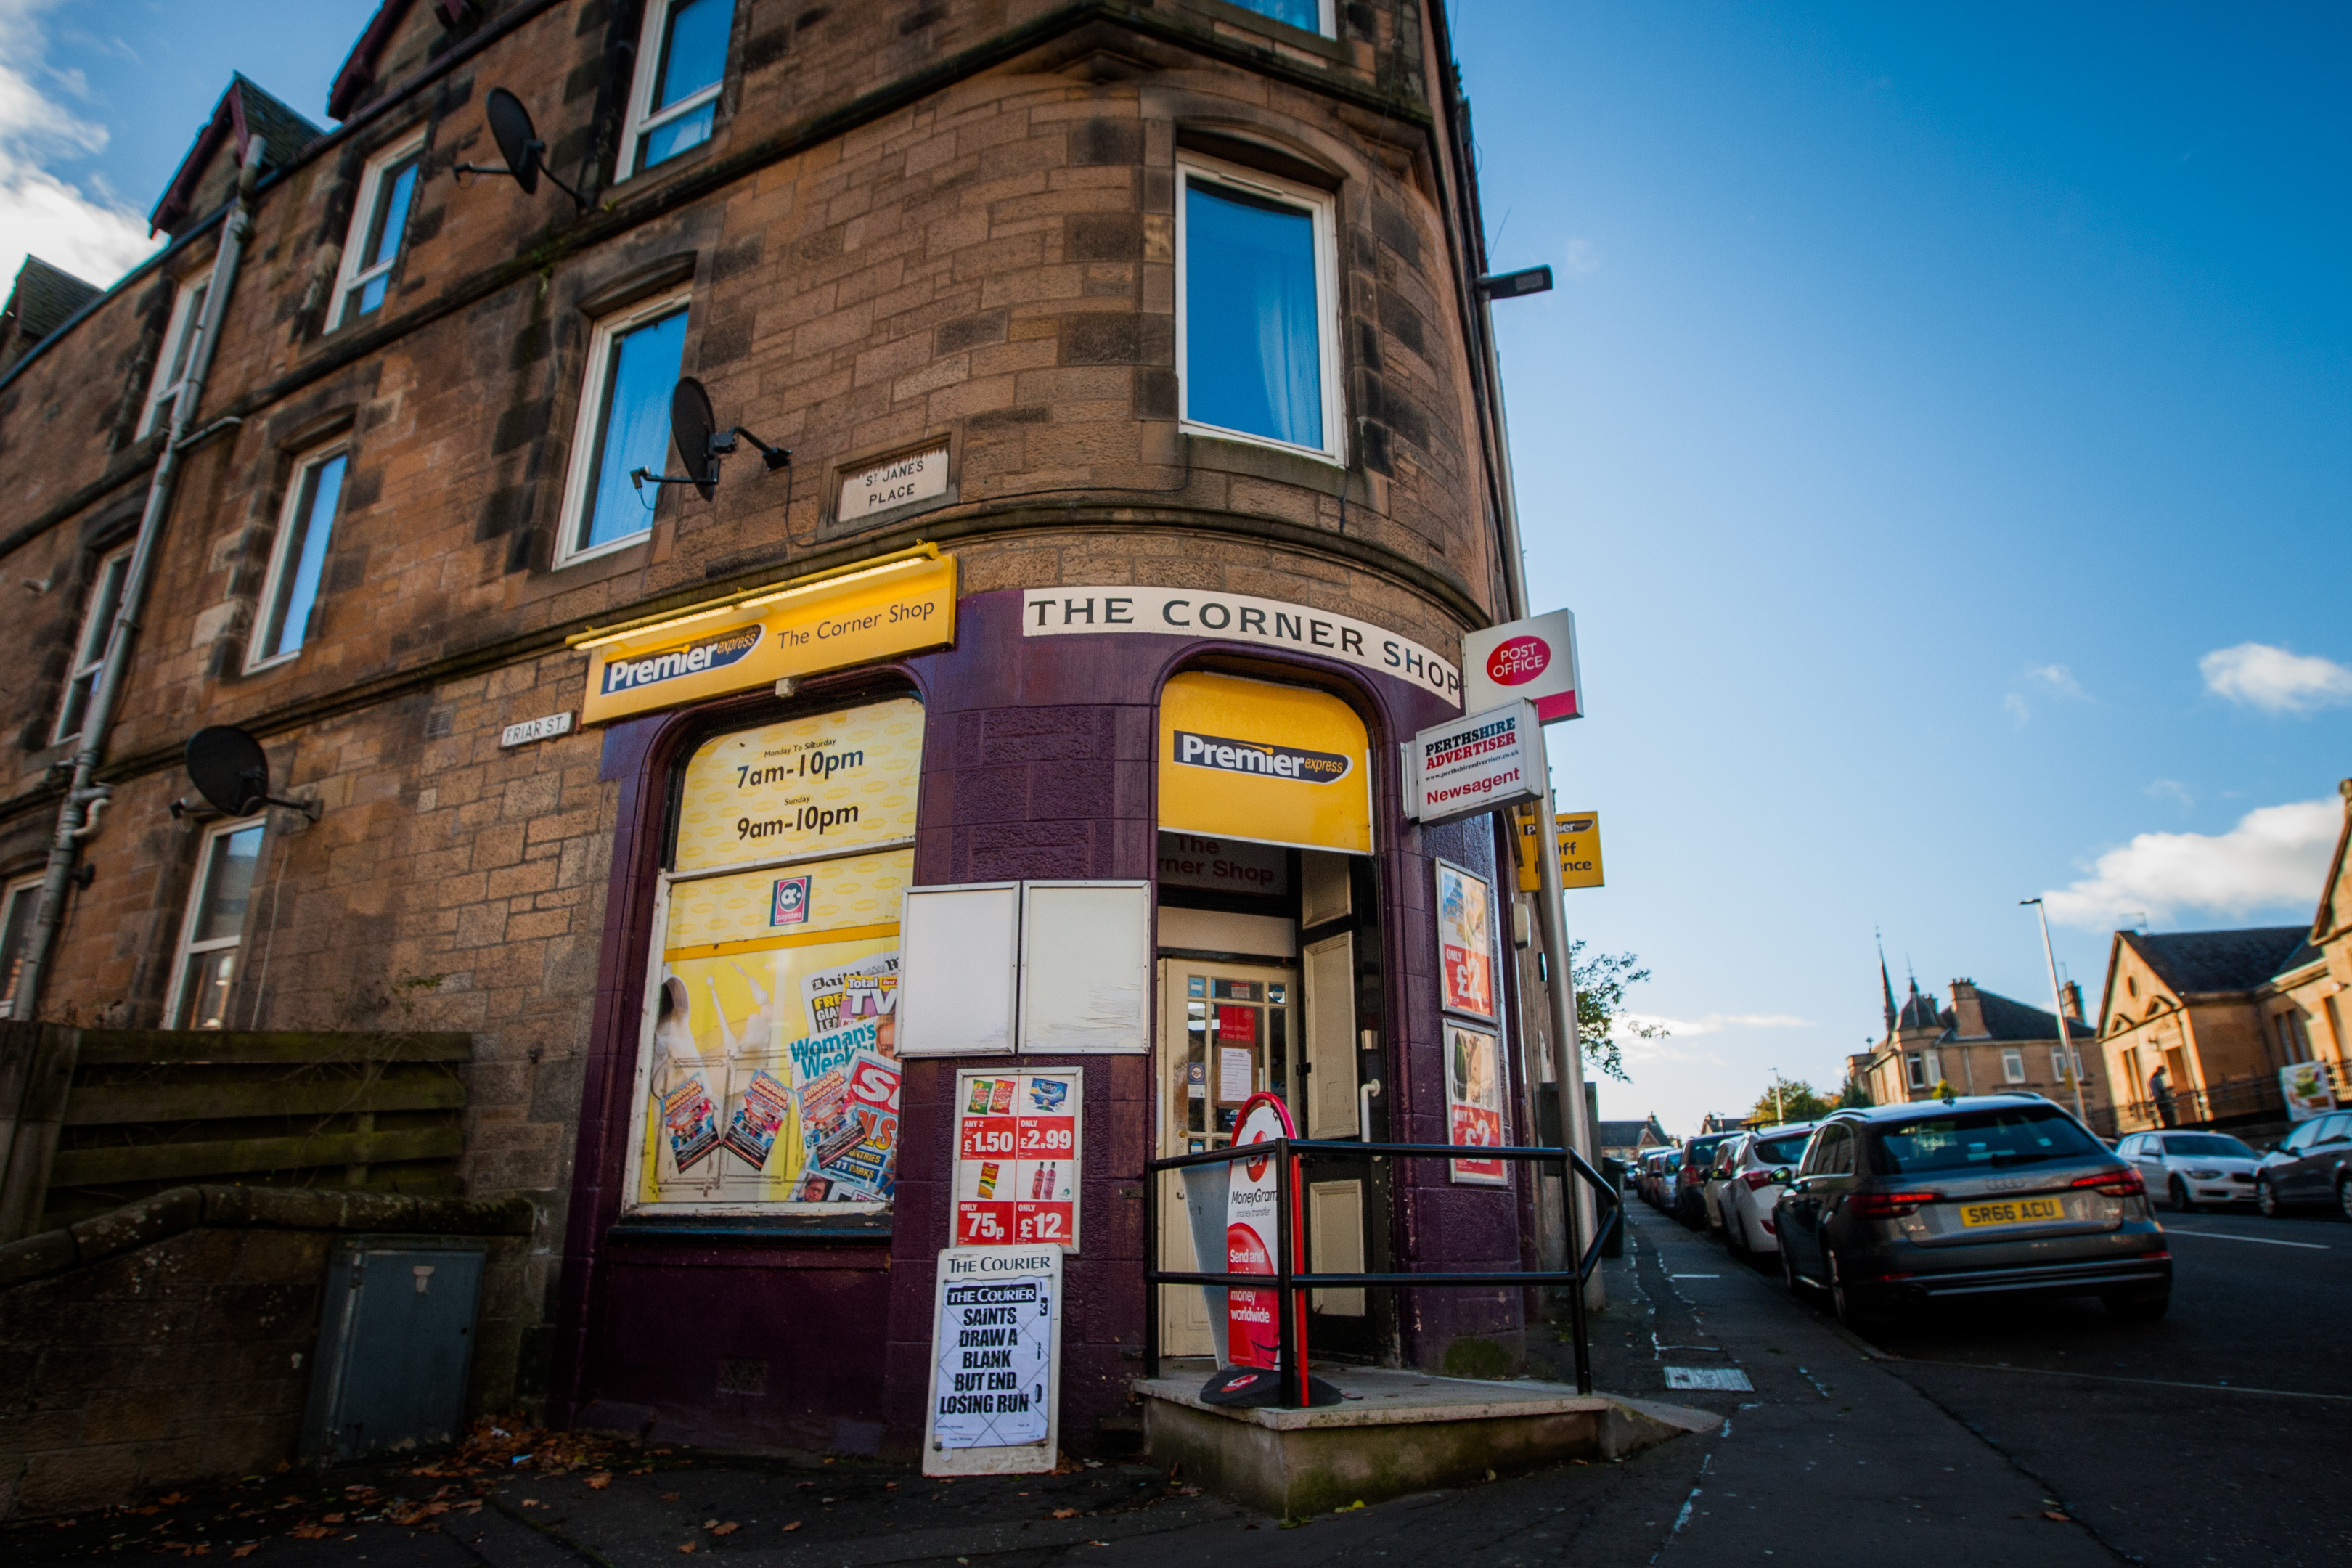 The Corner Shop / Post Office in Perth